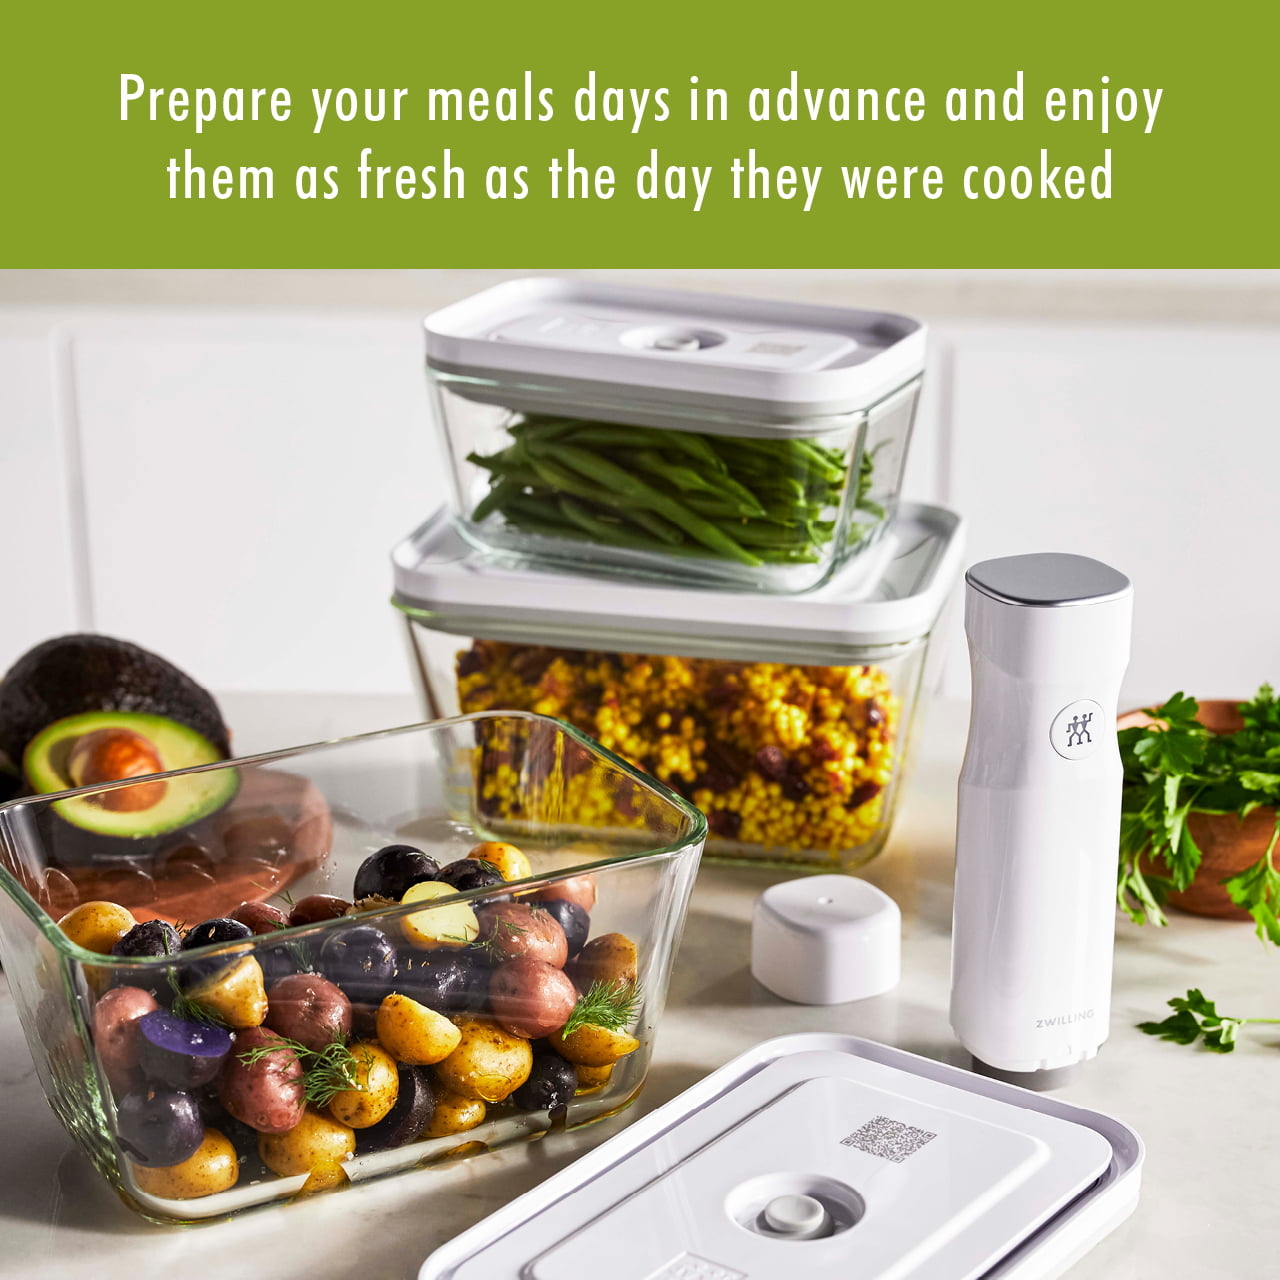 Meh: Bought a FoodSaver? Need Fresh Containers?